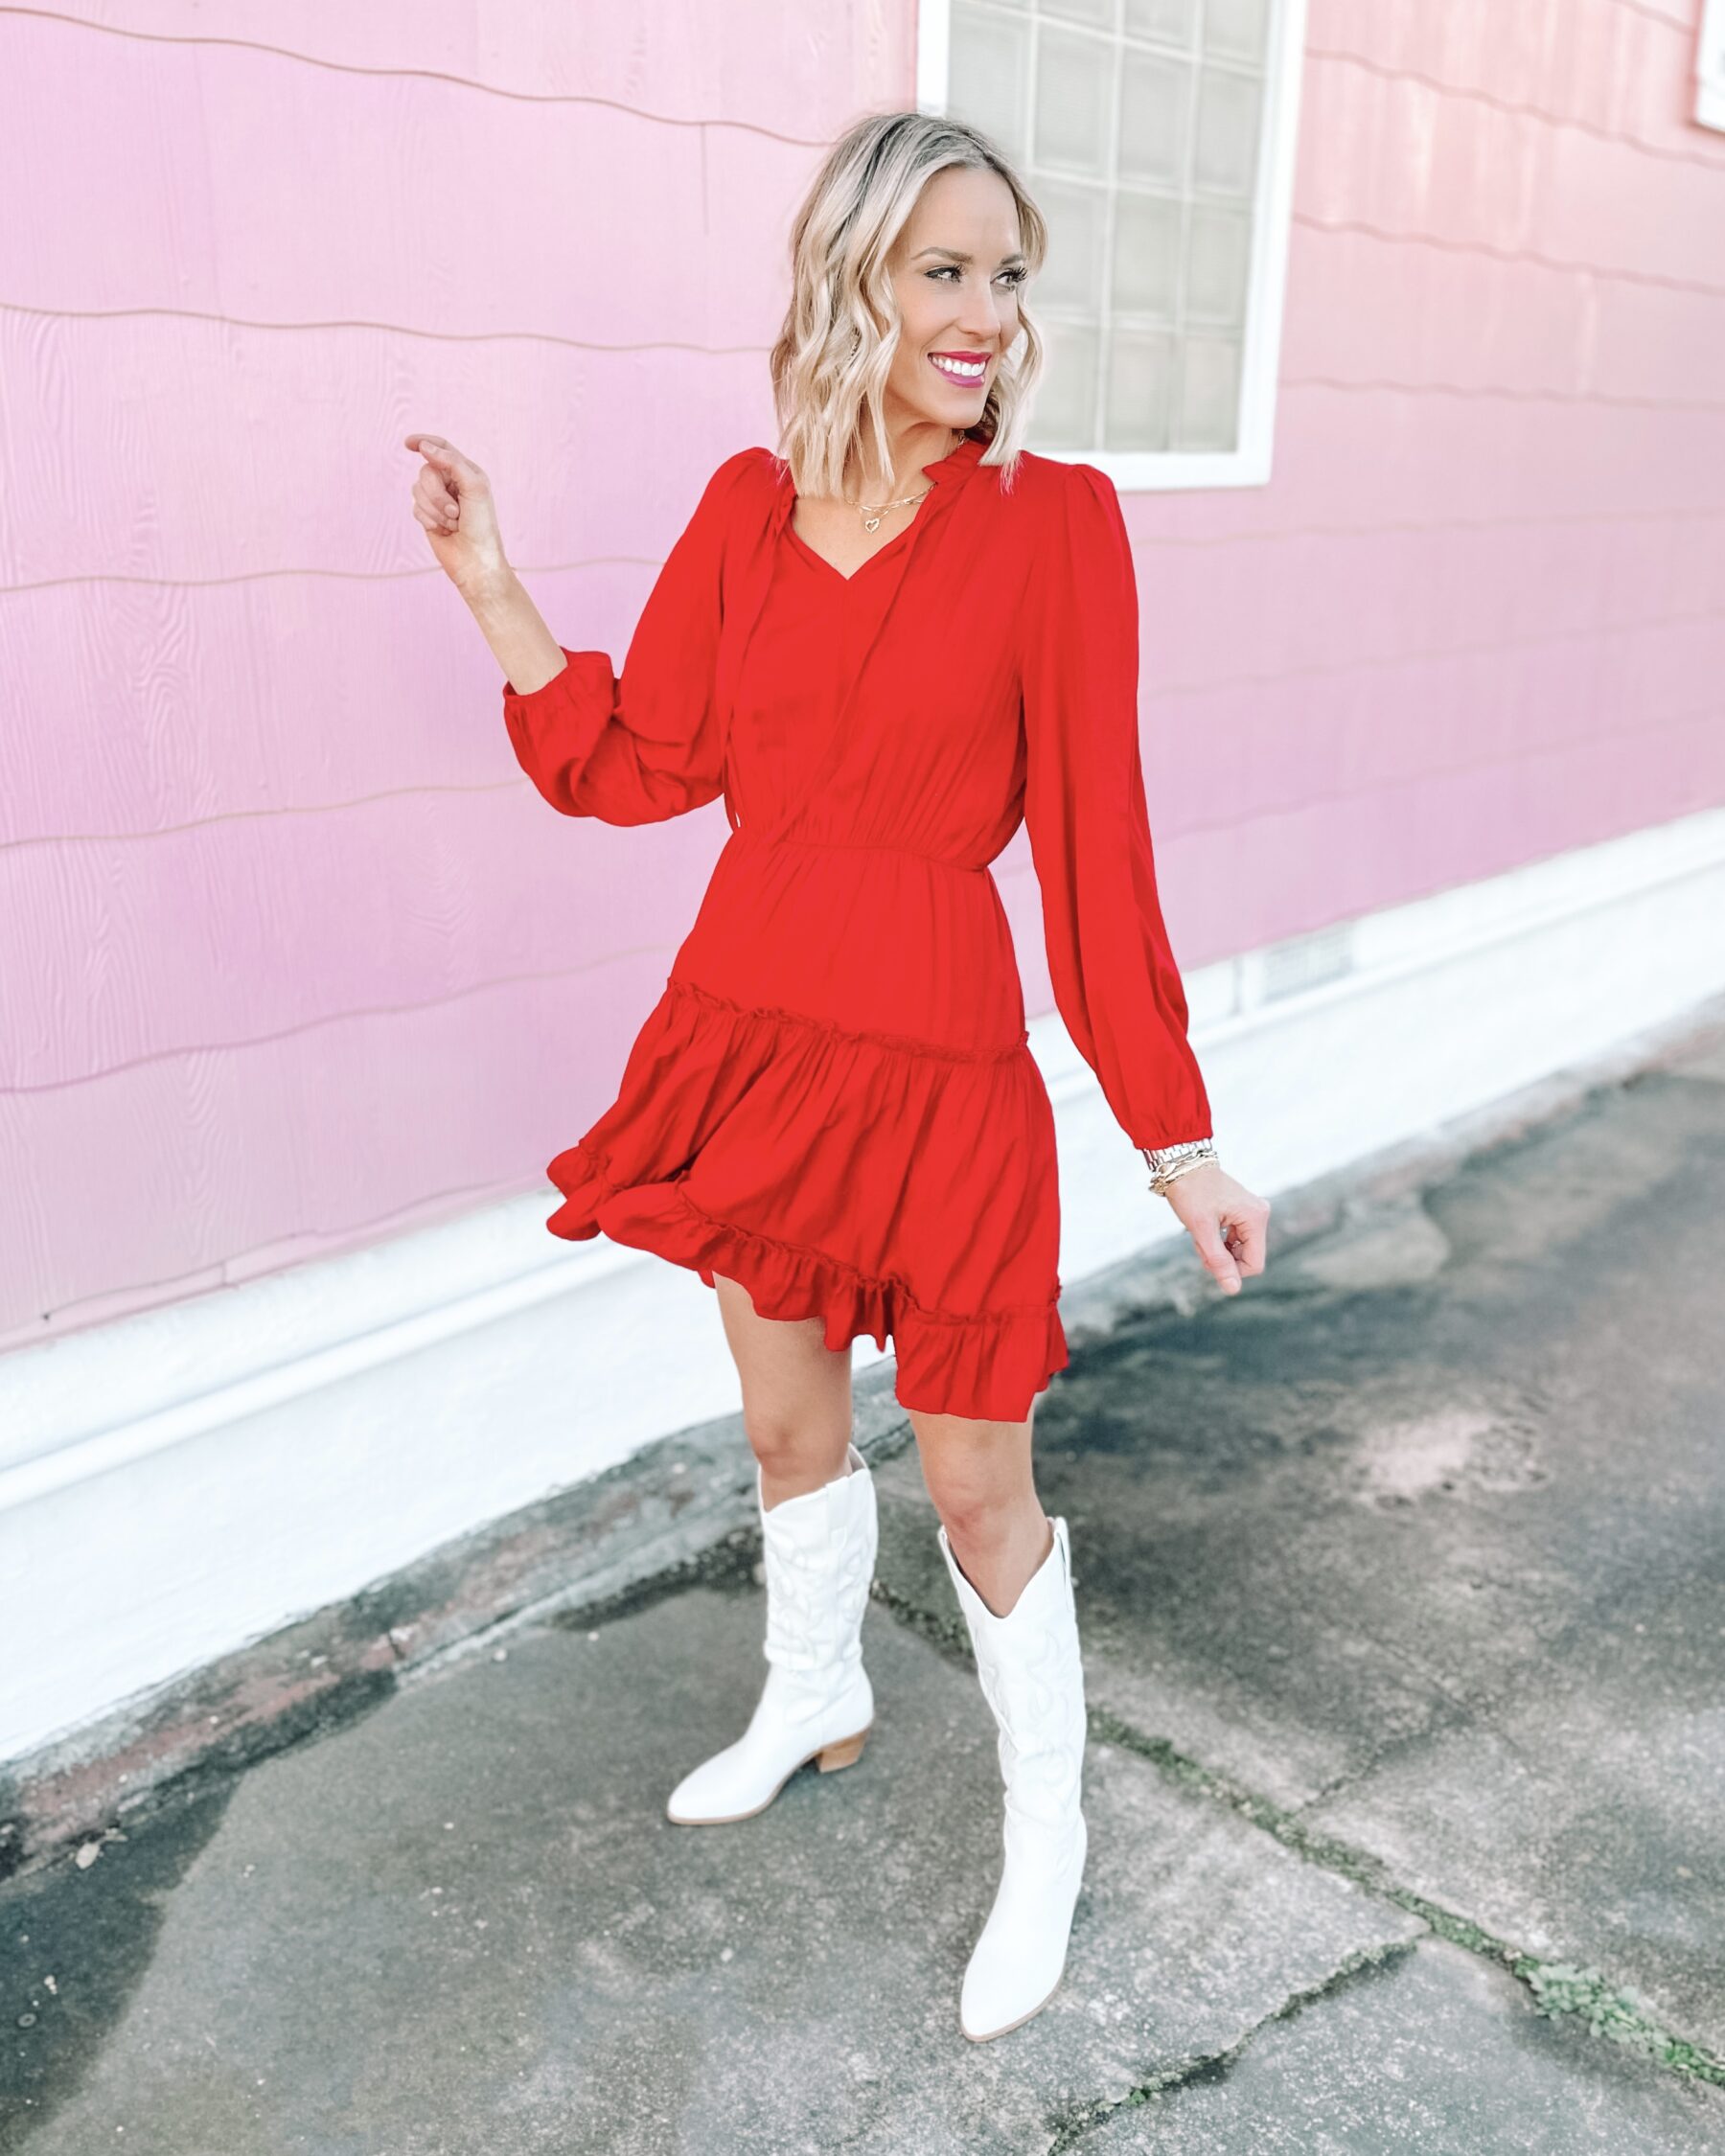 How to Wear Cowgirl Boots with Skirts and Dresses